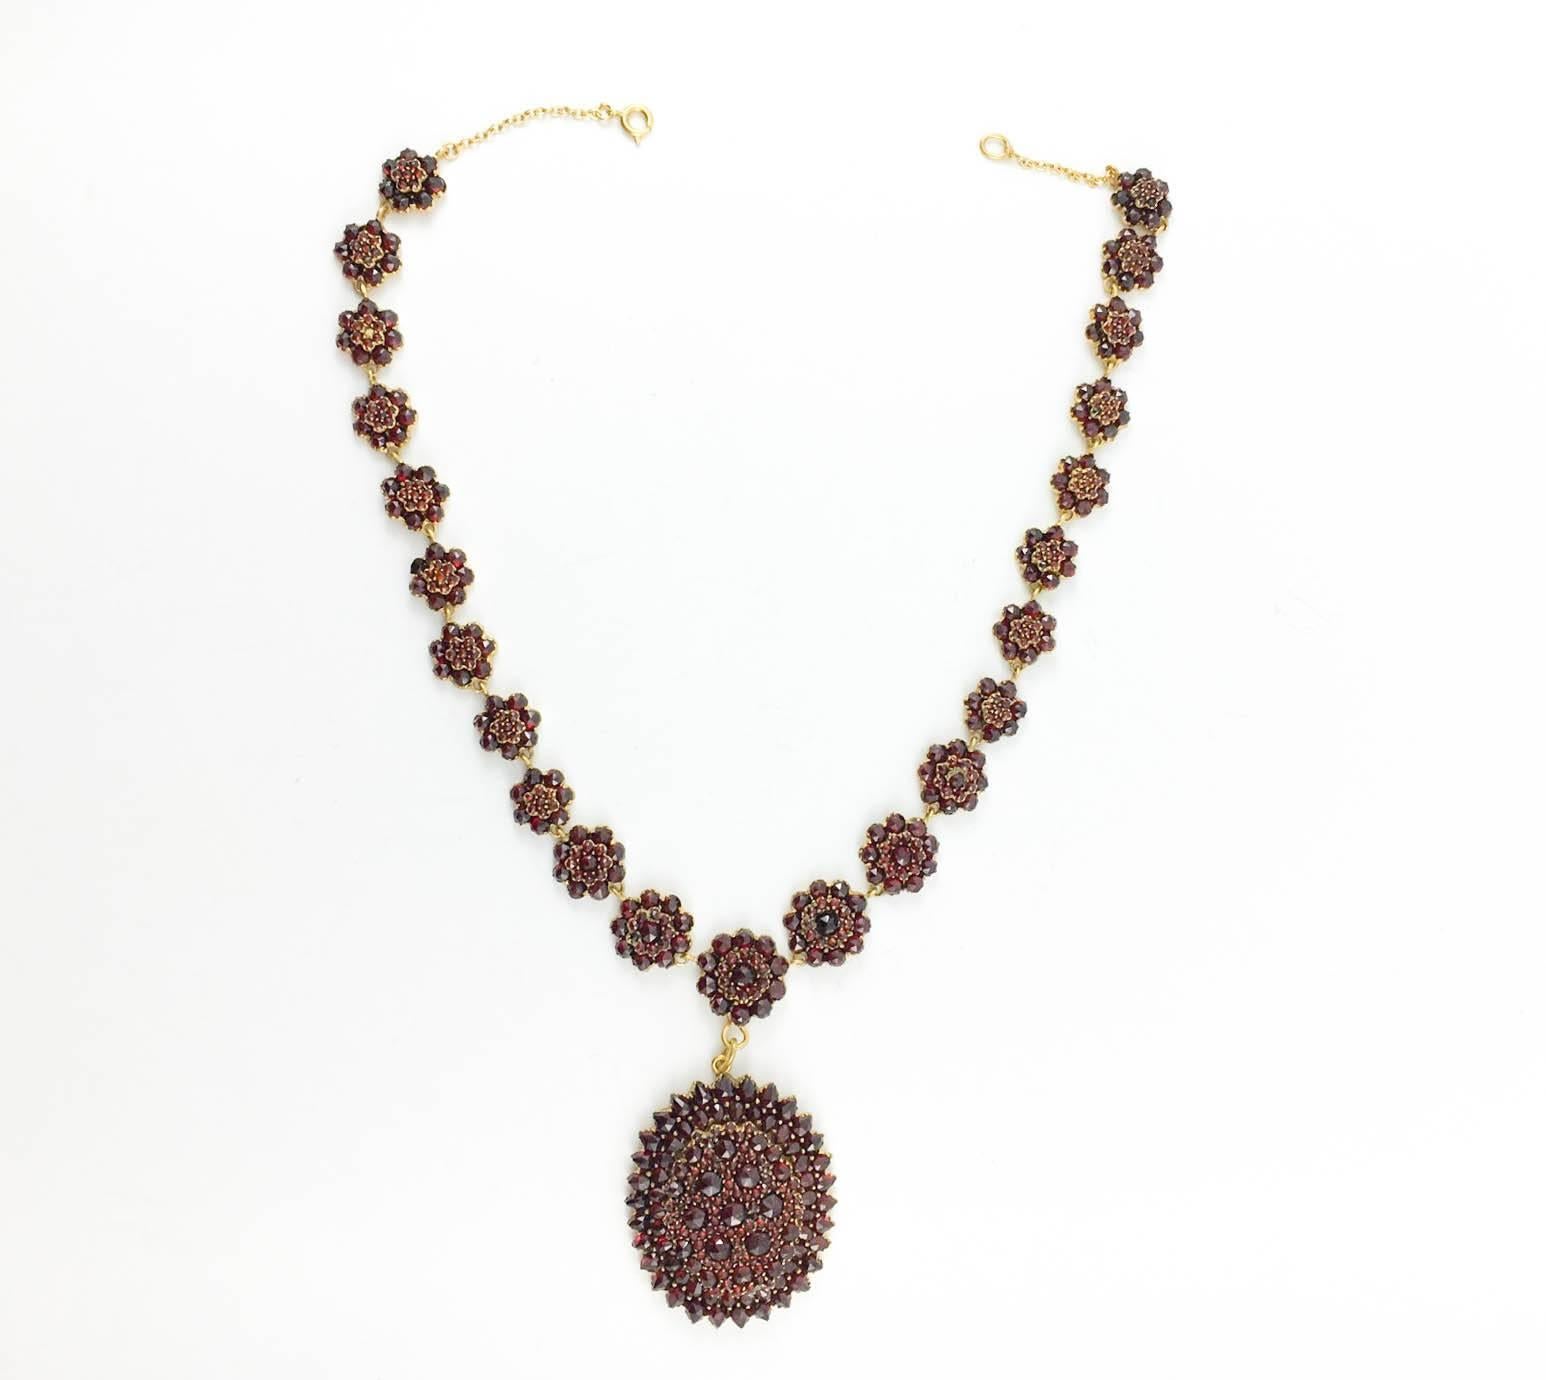 Antique Garnet Necklace. This beautiful piece of jewellery dating from the 1900s features a stunning and elaborate design in garnets. The stones have a gorgeous deep red tone to them. Great example of early 20th century Hungarian jewellery.

